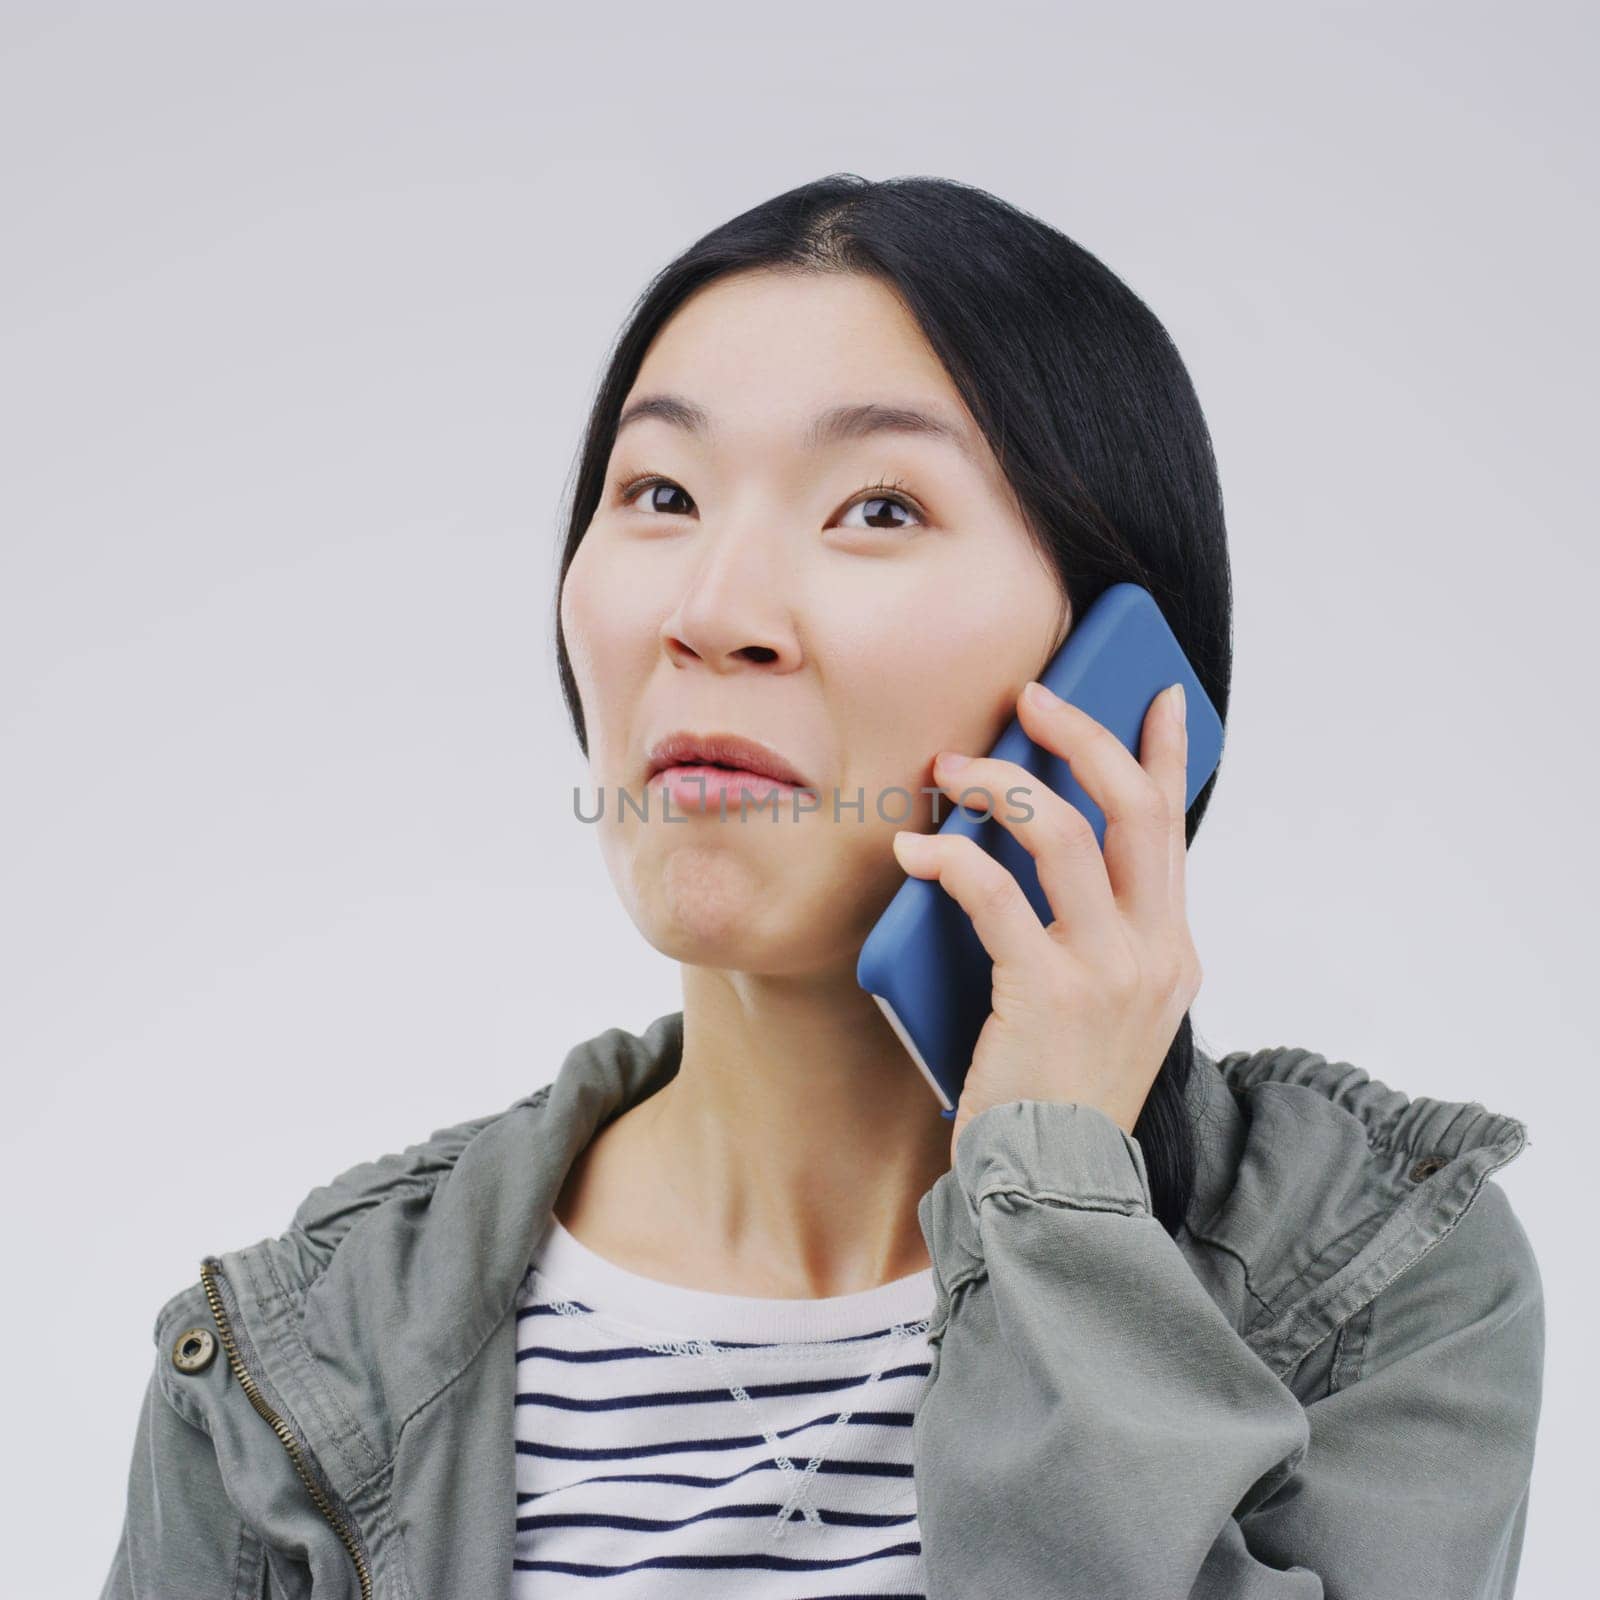 Gossip, phone call and Asian woman talking in studio isolated on a white background. Listening, cellphone and female person speaking, discussion or communication for conversation, news or online chat.